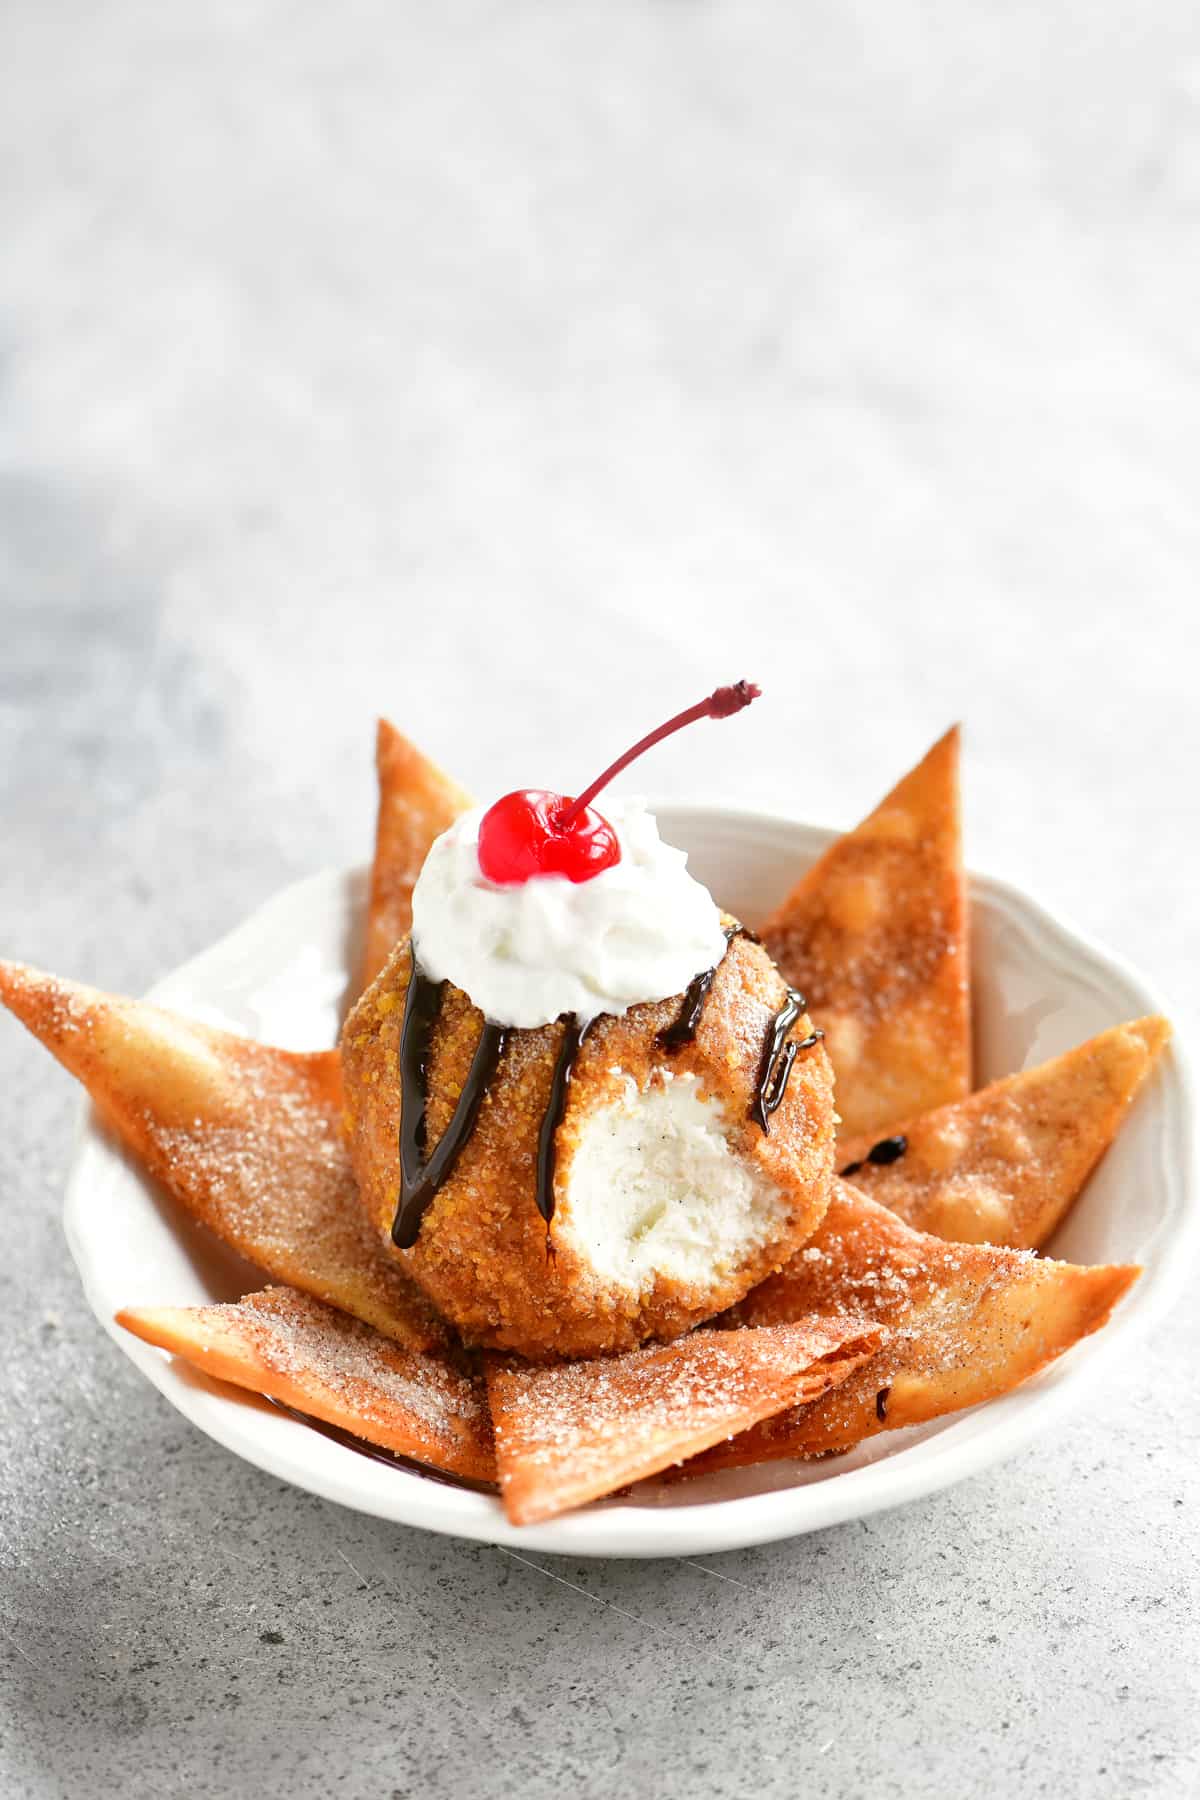 fried ice cream dessert with a bite out of it